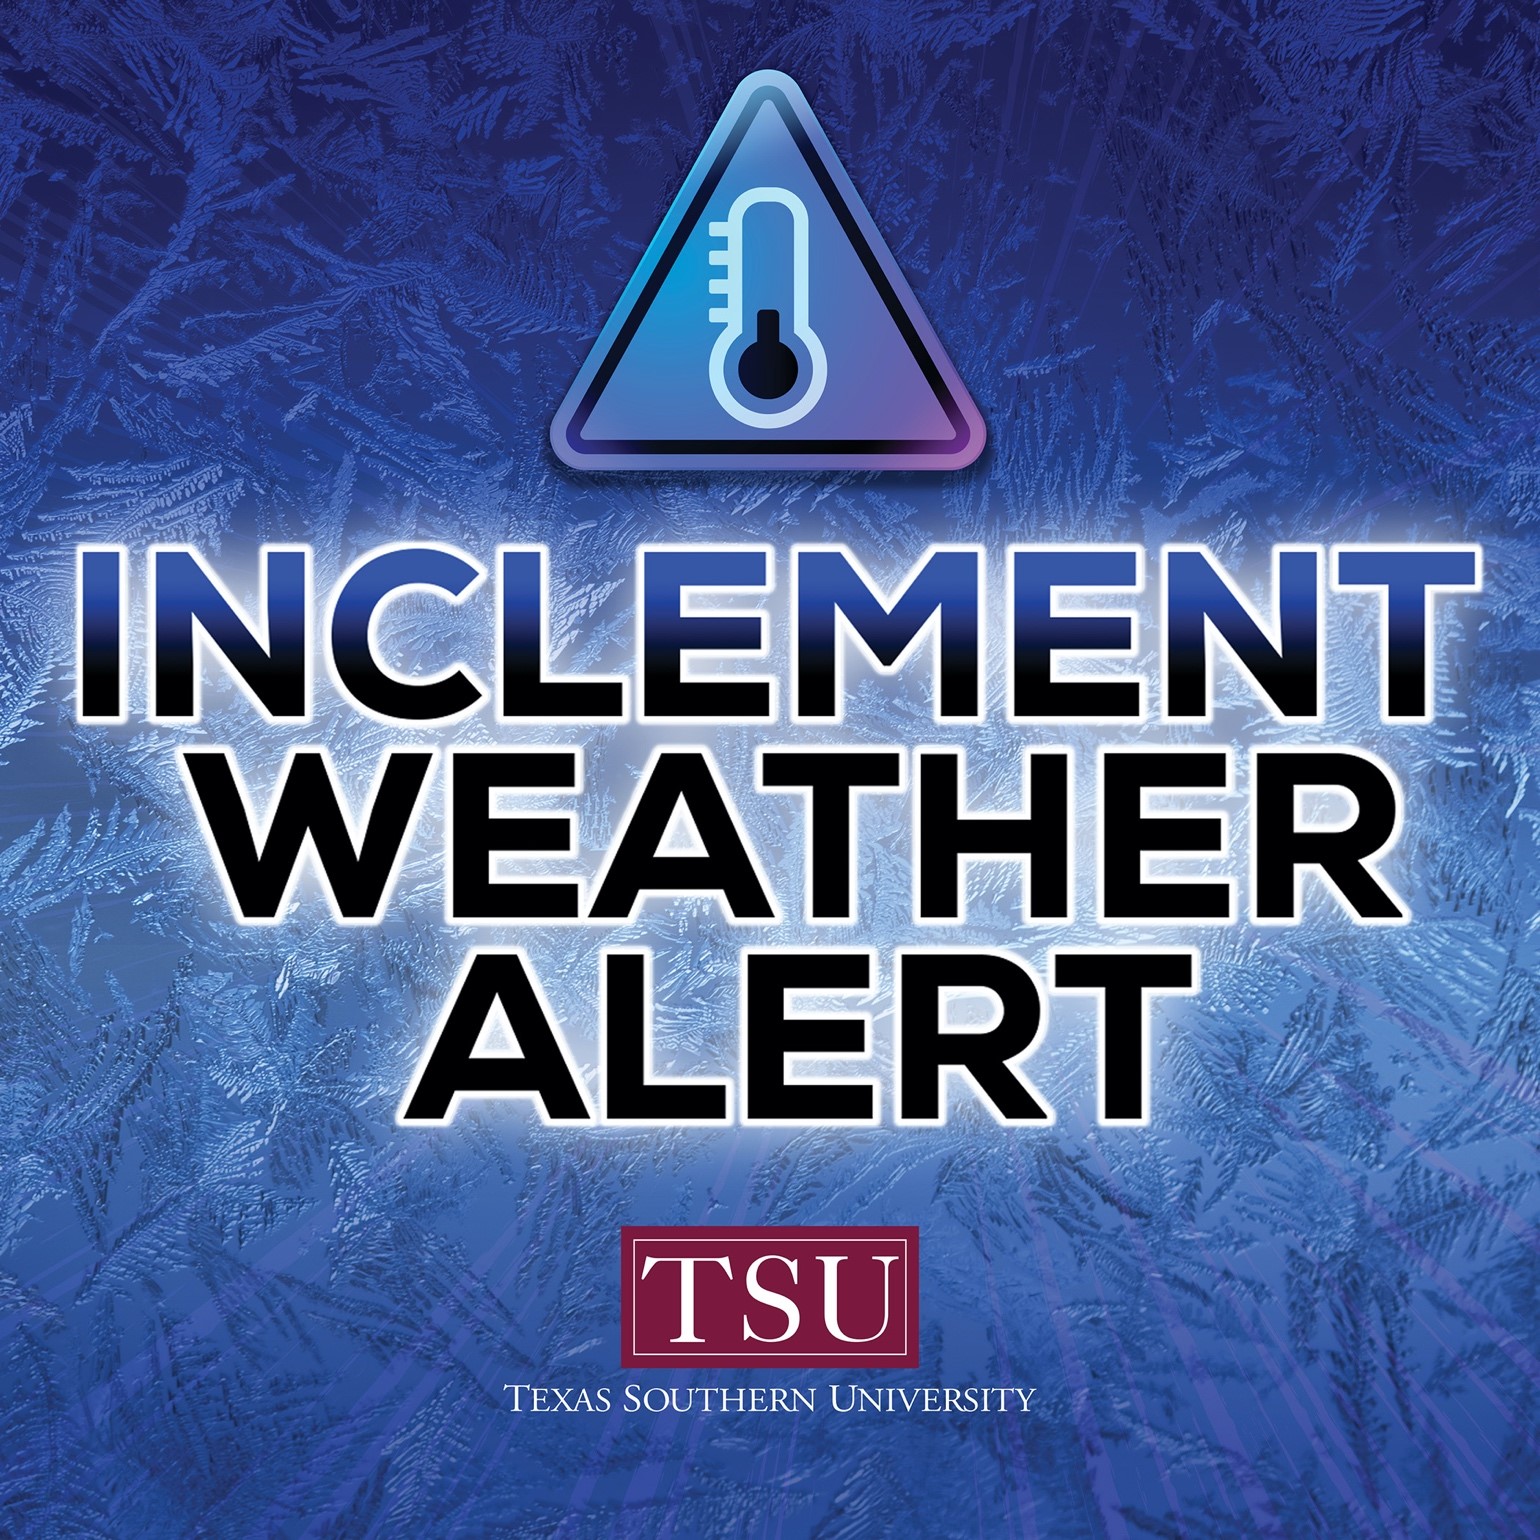 Texas Southern University to Modify Operations Ahead of Inclement Weather 